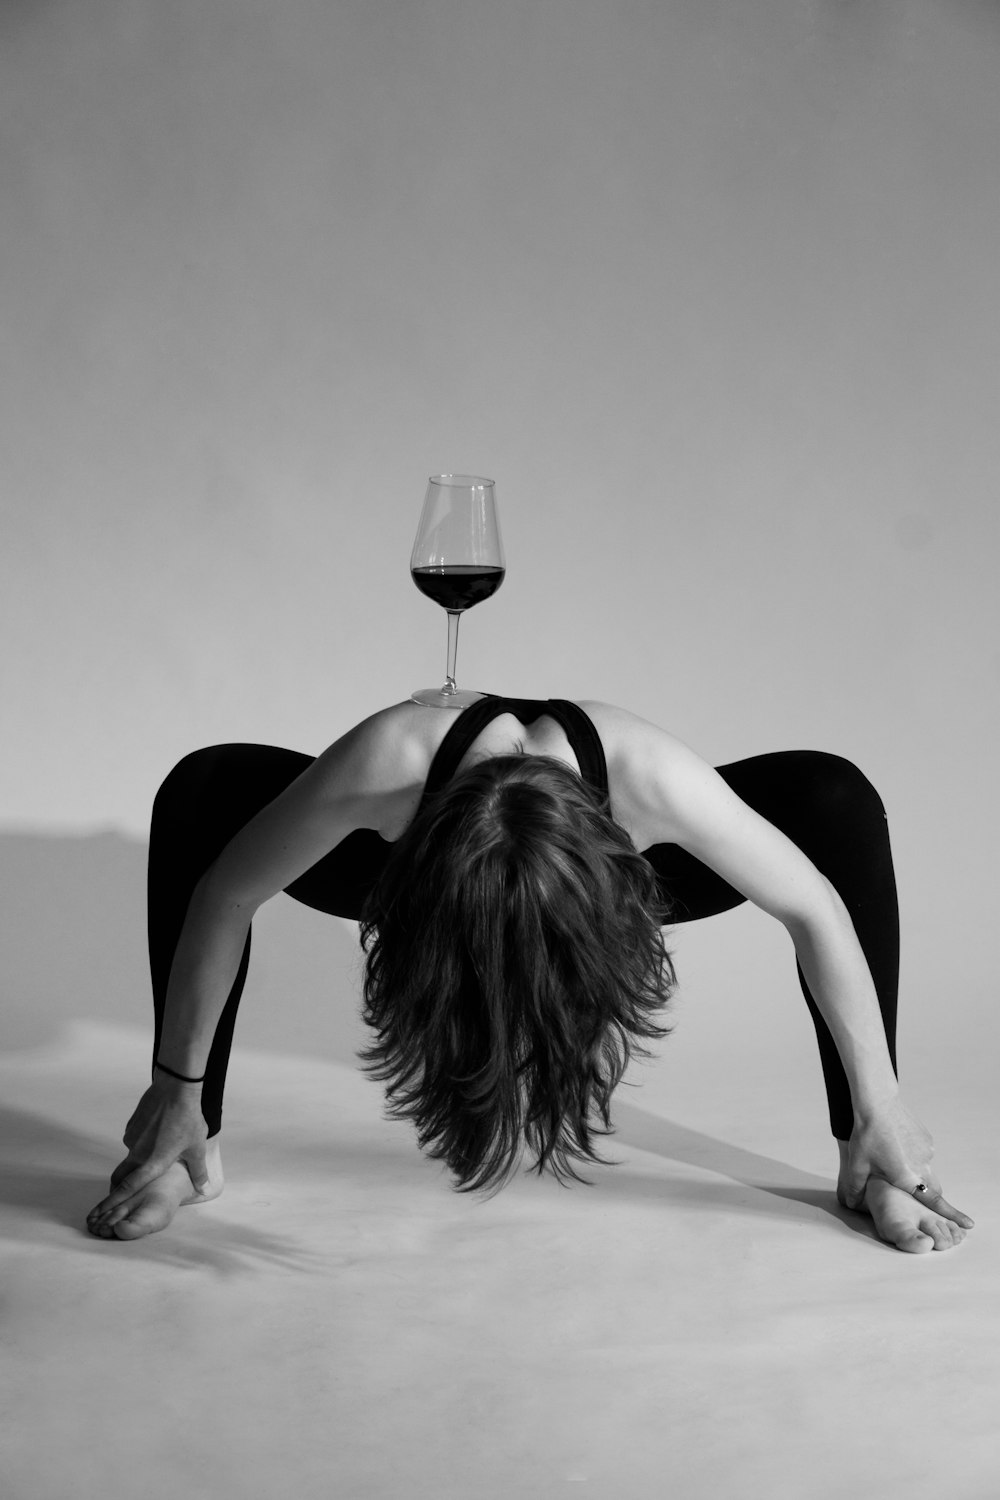 a woman lying on the floor with a glass of wine